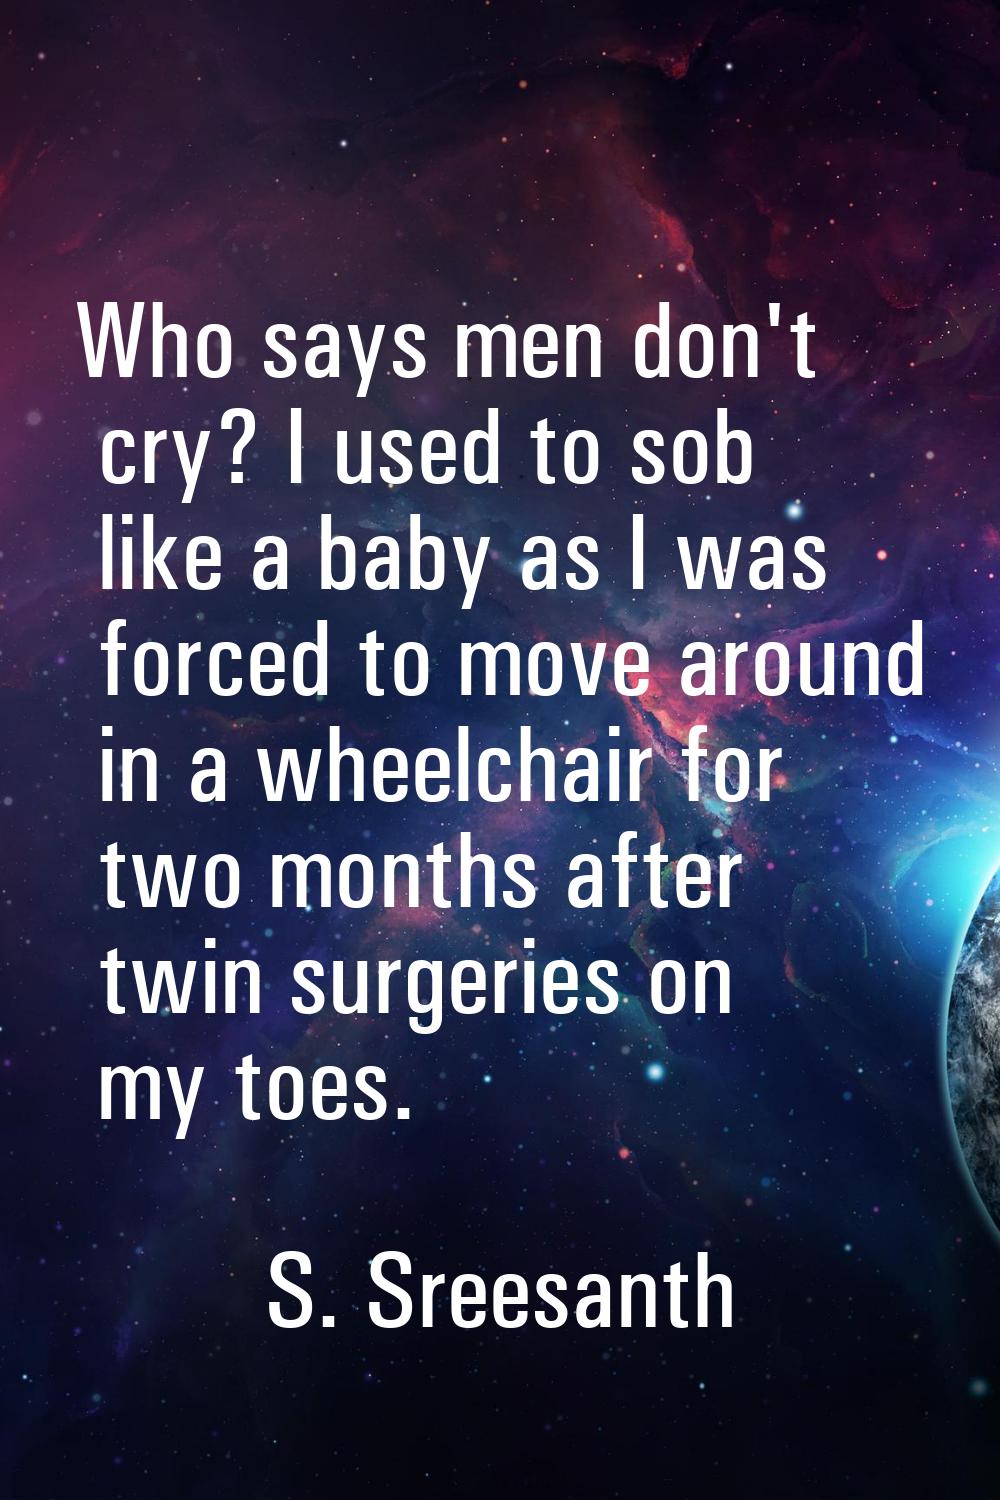 Who says men don't cry? I used to sob like a baby as I was forced to move around in a wheelchair fo